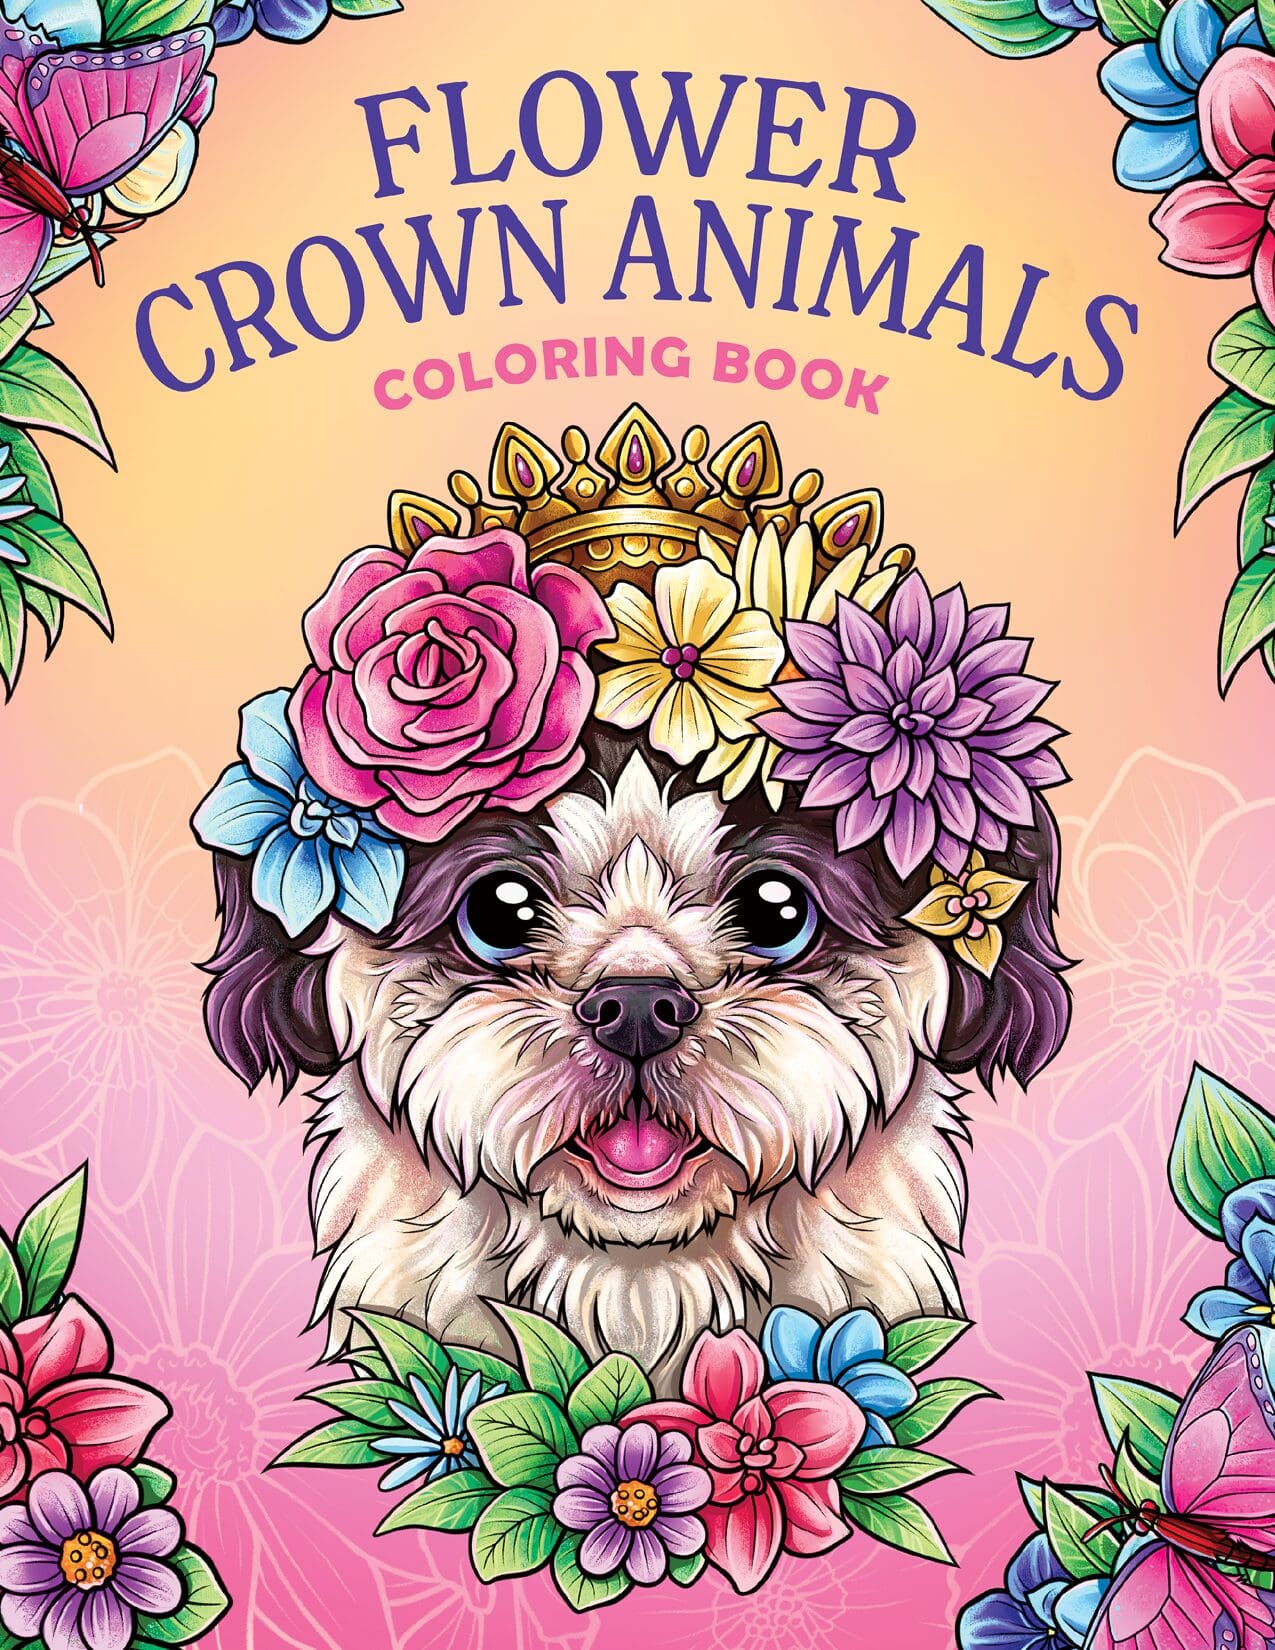 Adult Coloring Book 60 Animals: Stress Relieving Animal Coloring Designs  for Hours of Fun. Best Choice as a Gift for Someone Who Loves Animals and  Enj (Paperback)